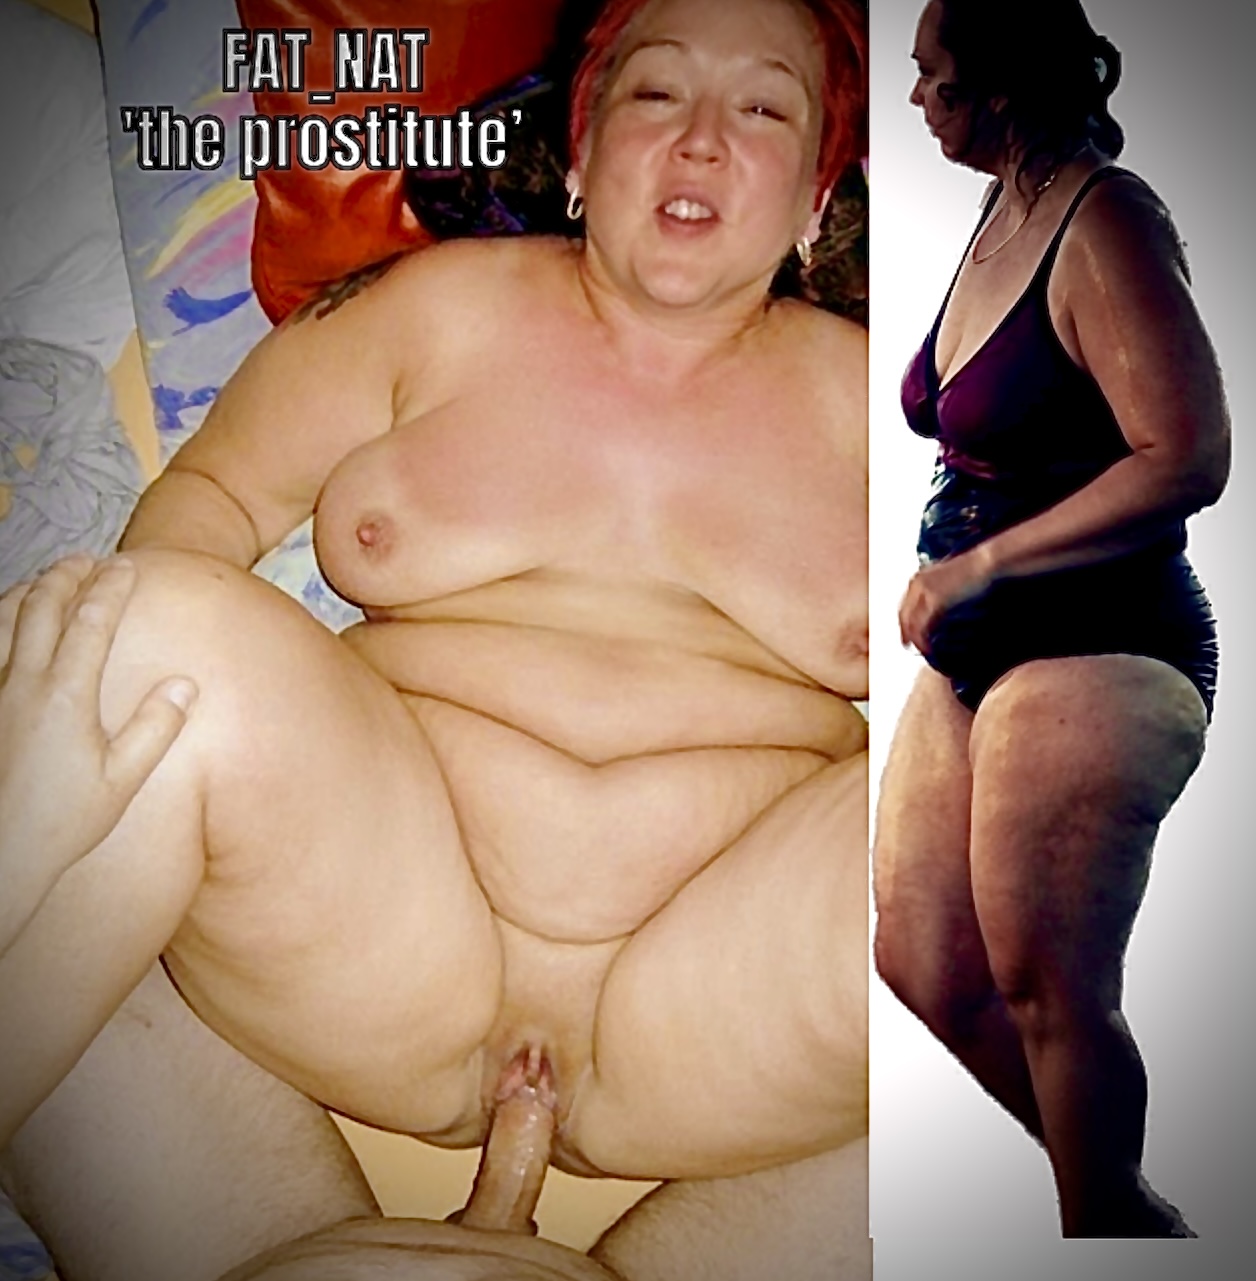 Sex Therapist NatFour = ‘the prostitute’ FAT_NAT